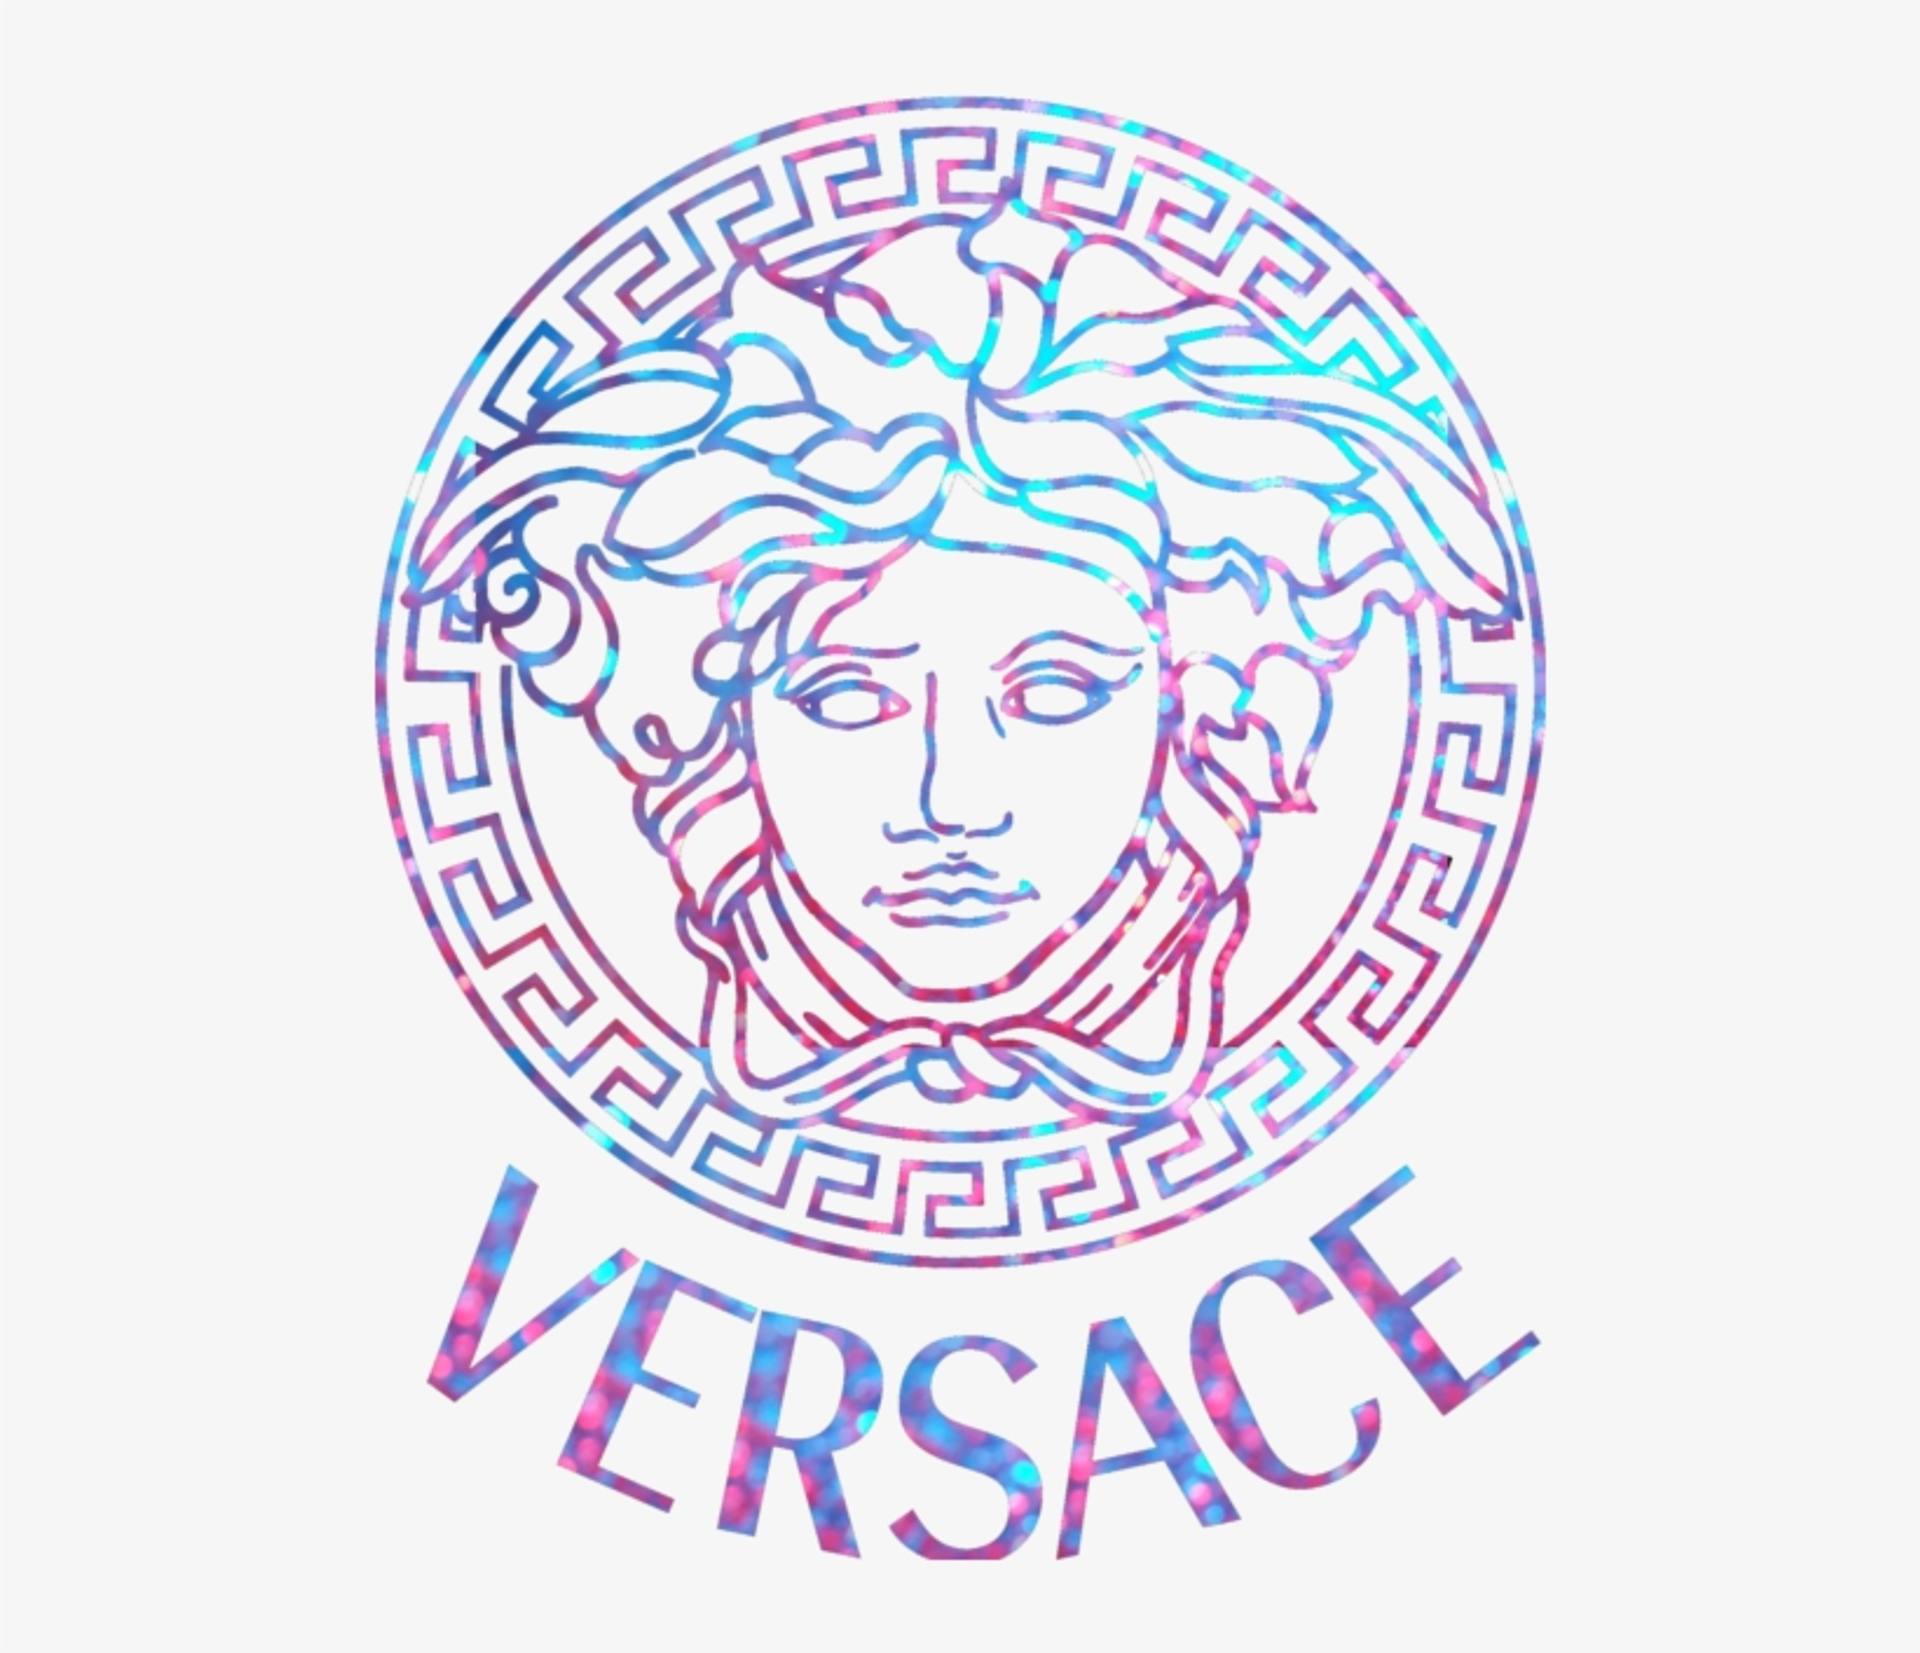 An example of Versace's use of colour swapping on their logo for different product lines. 